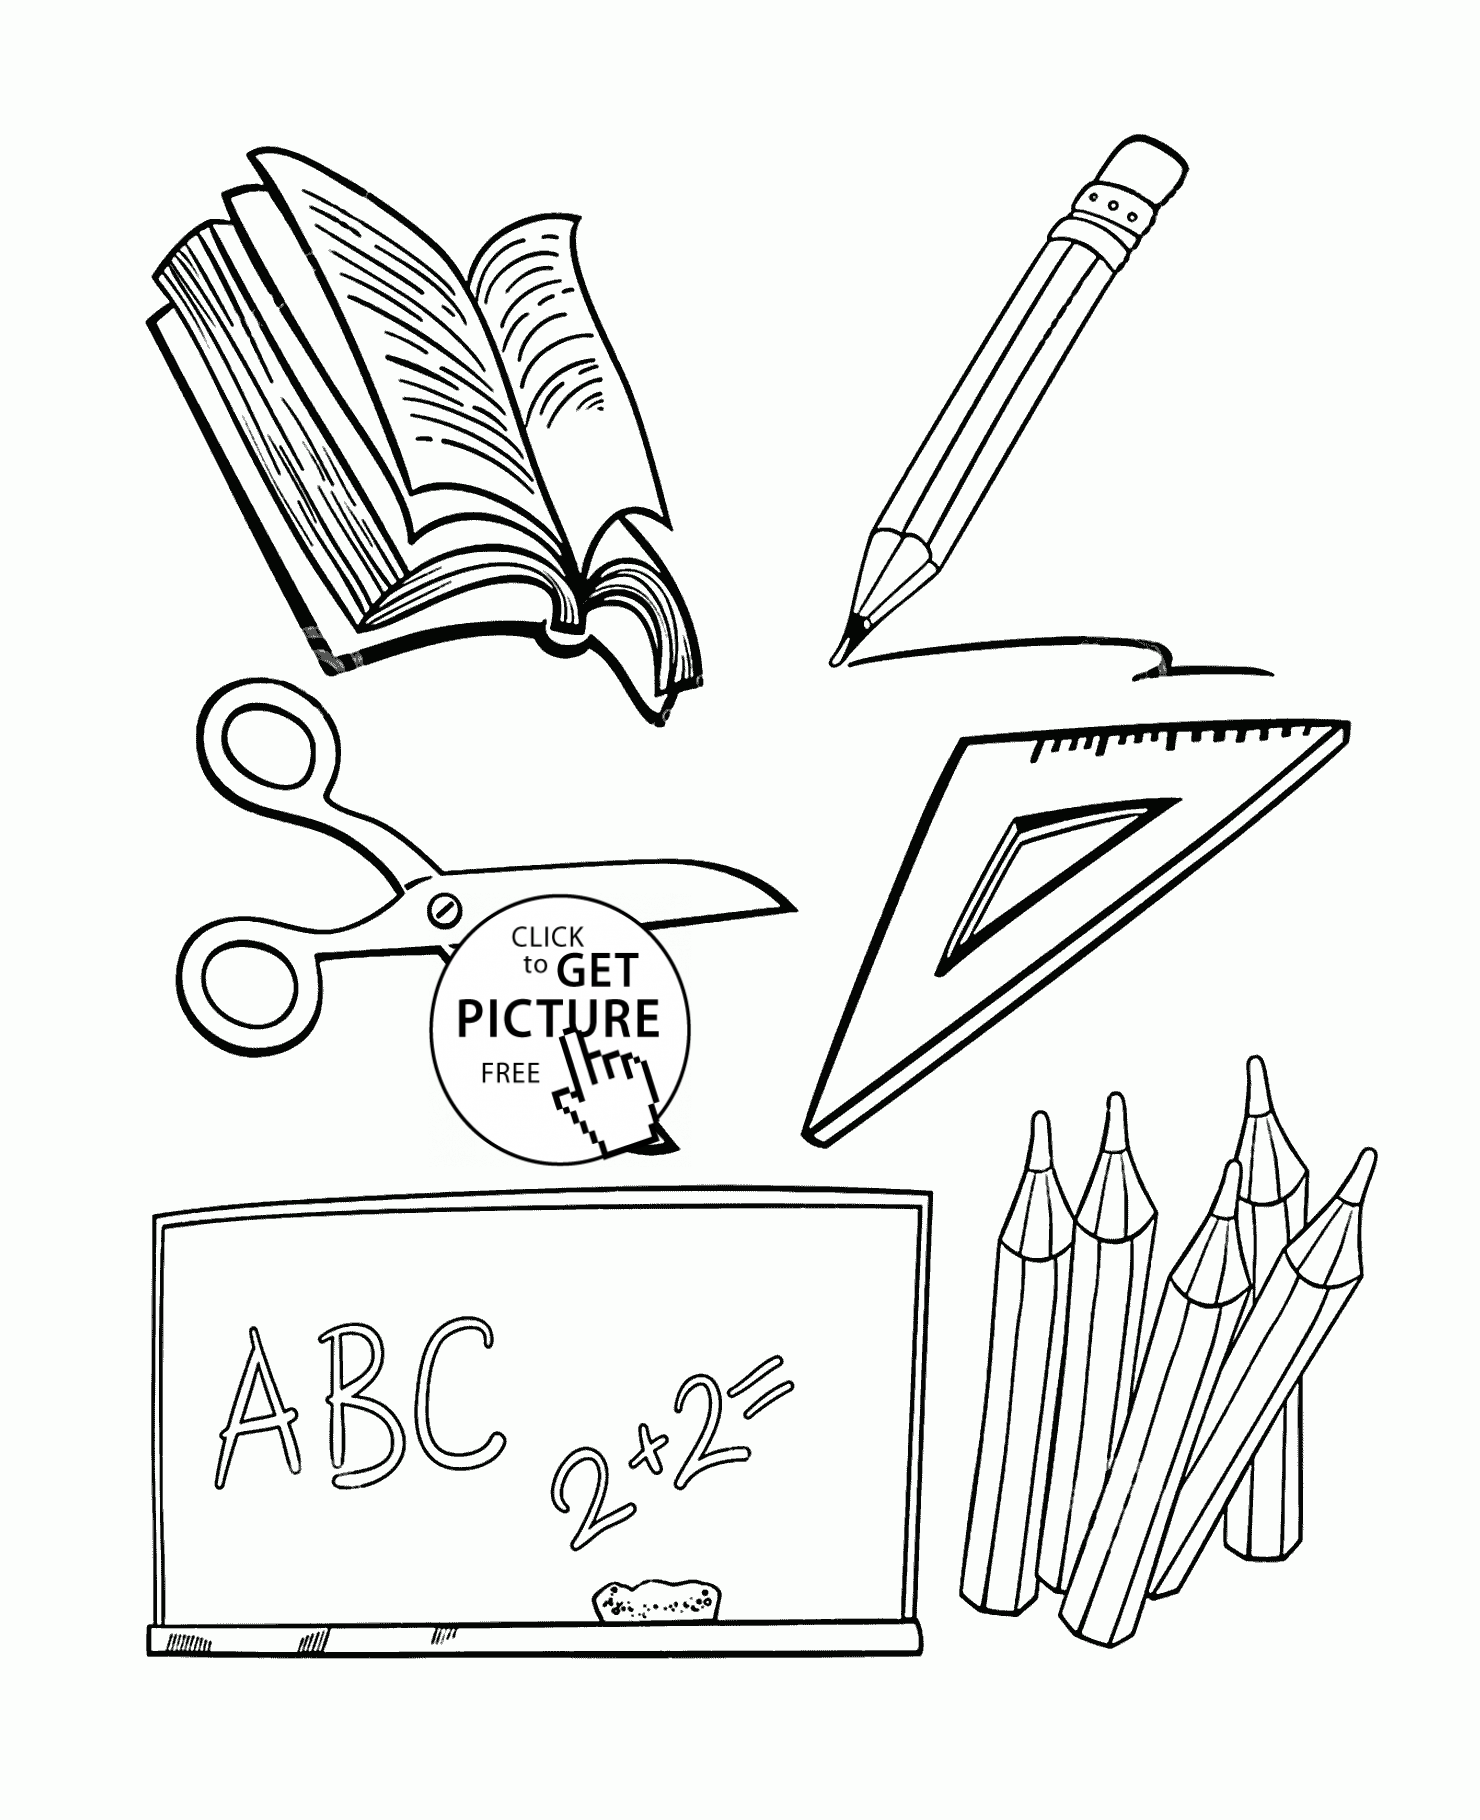 School Objects coloring page for kids, back to school coloring ...